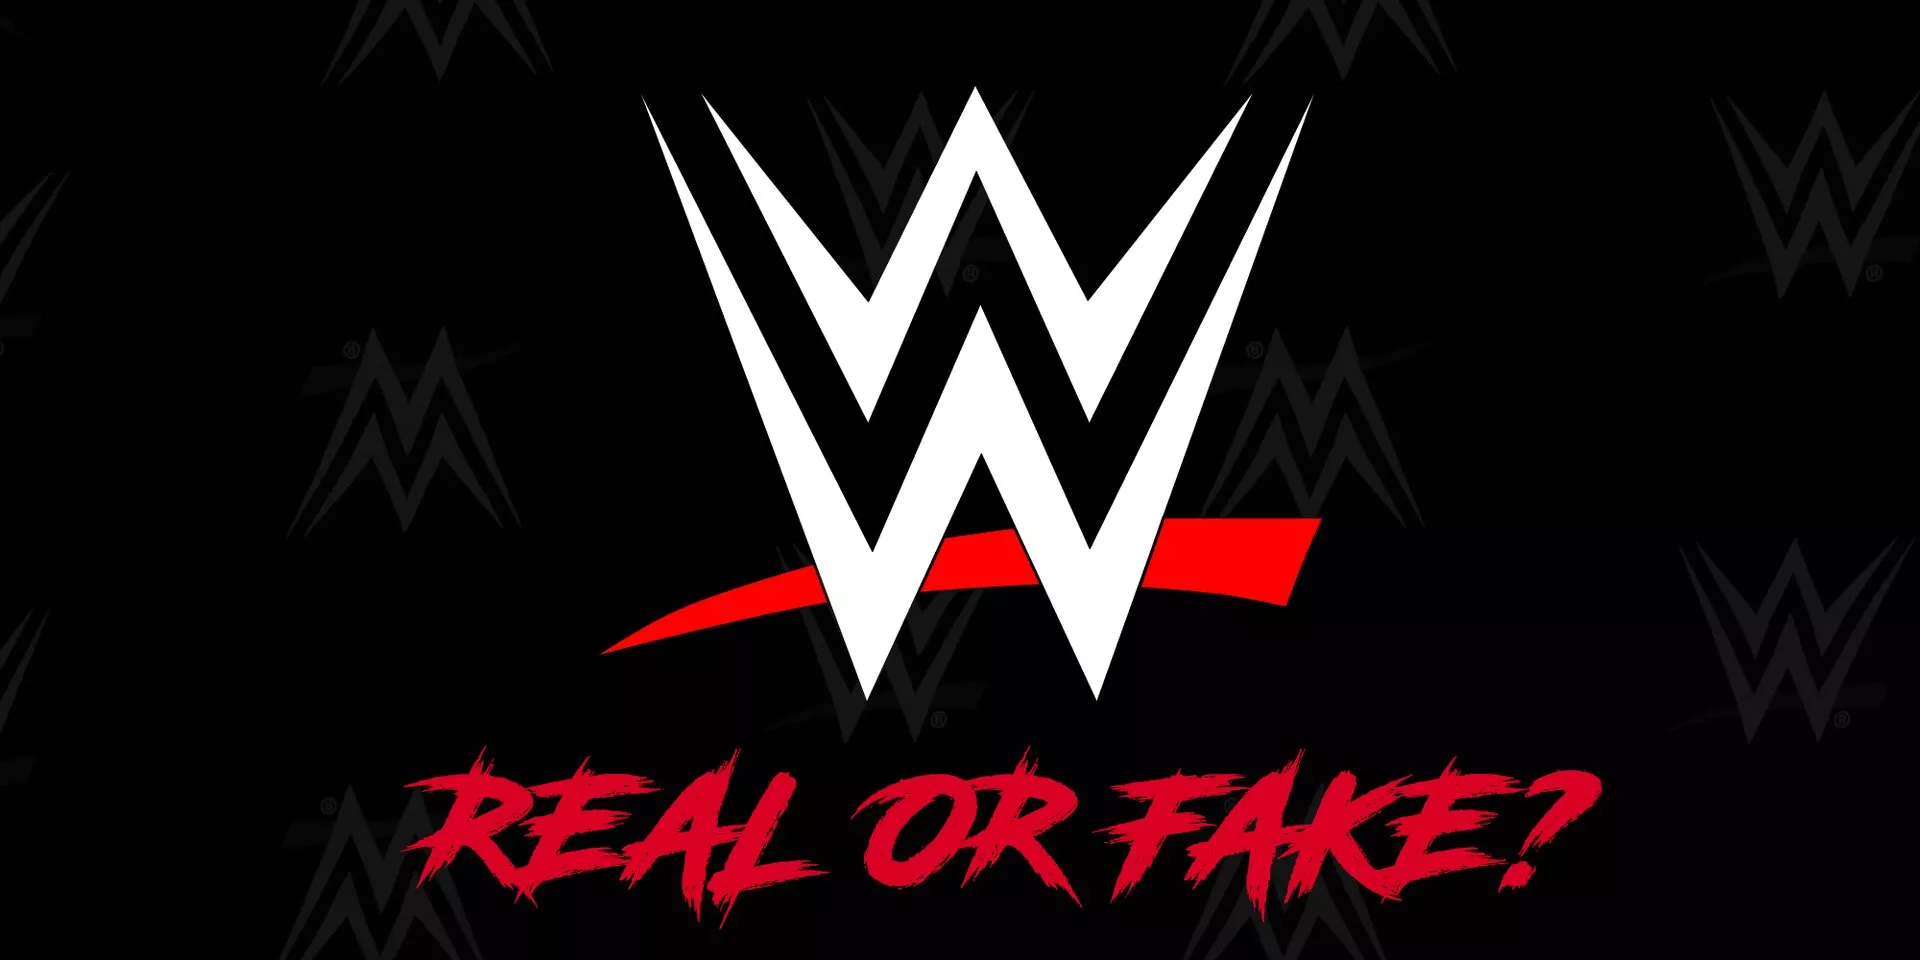 is the wwe fake